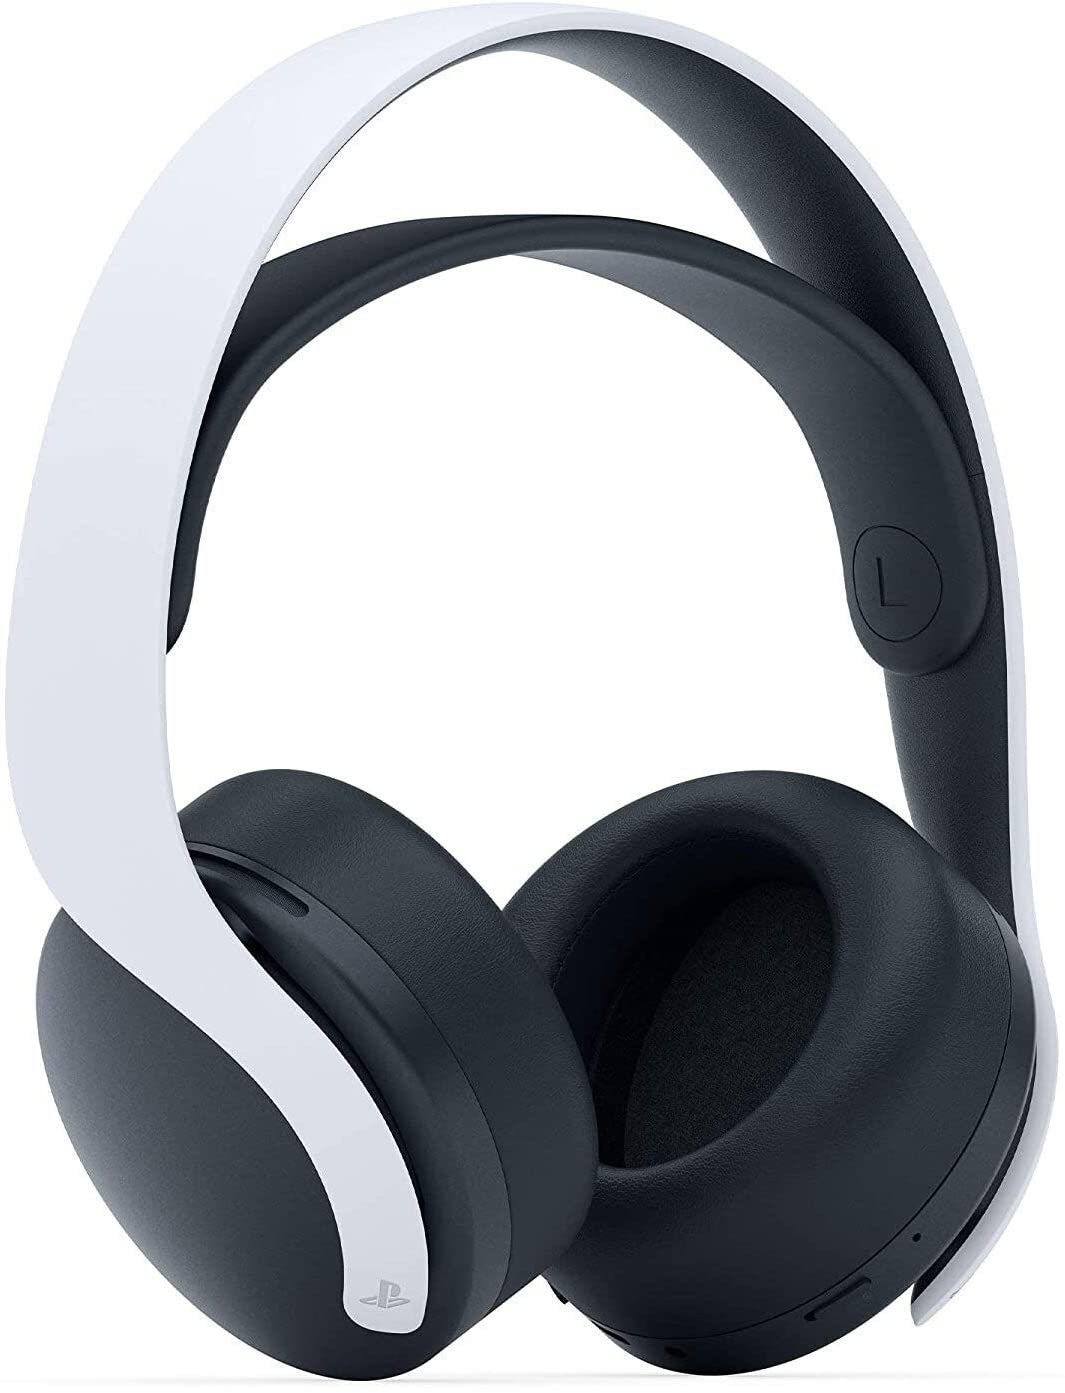 Sony Pulse 3D Wireless Headset for PlayStation 5 &amp; PlayStation 4 - White (New)